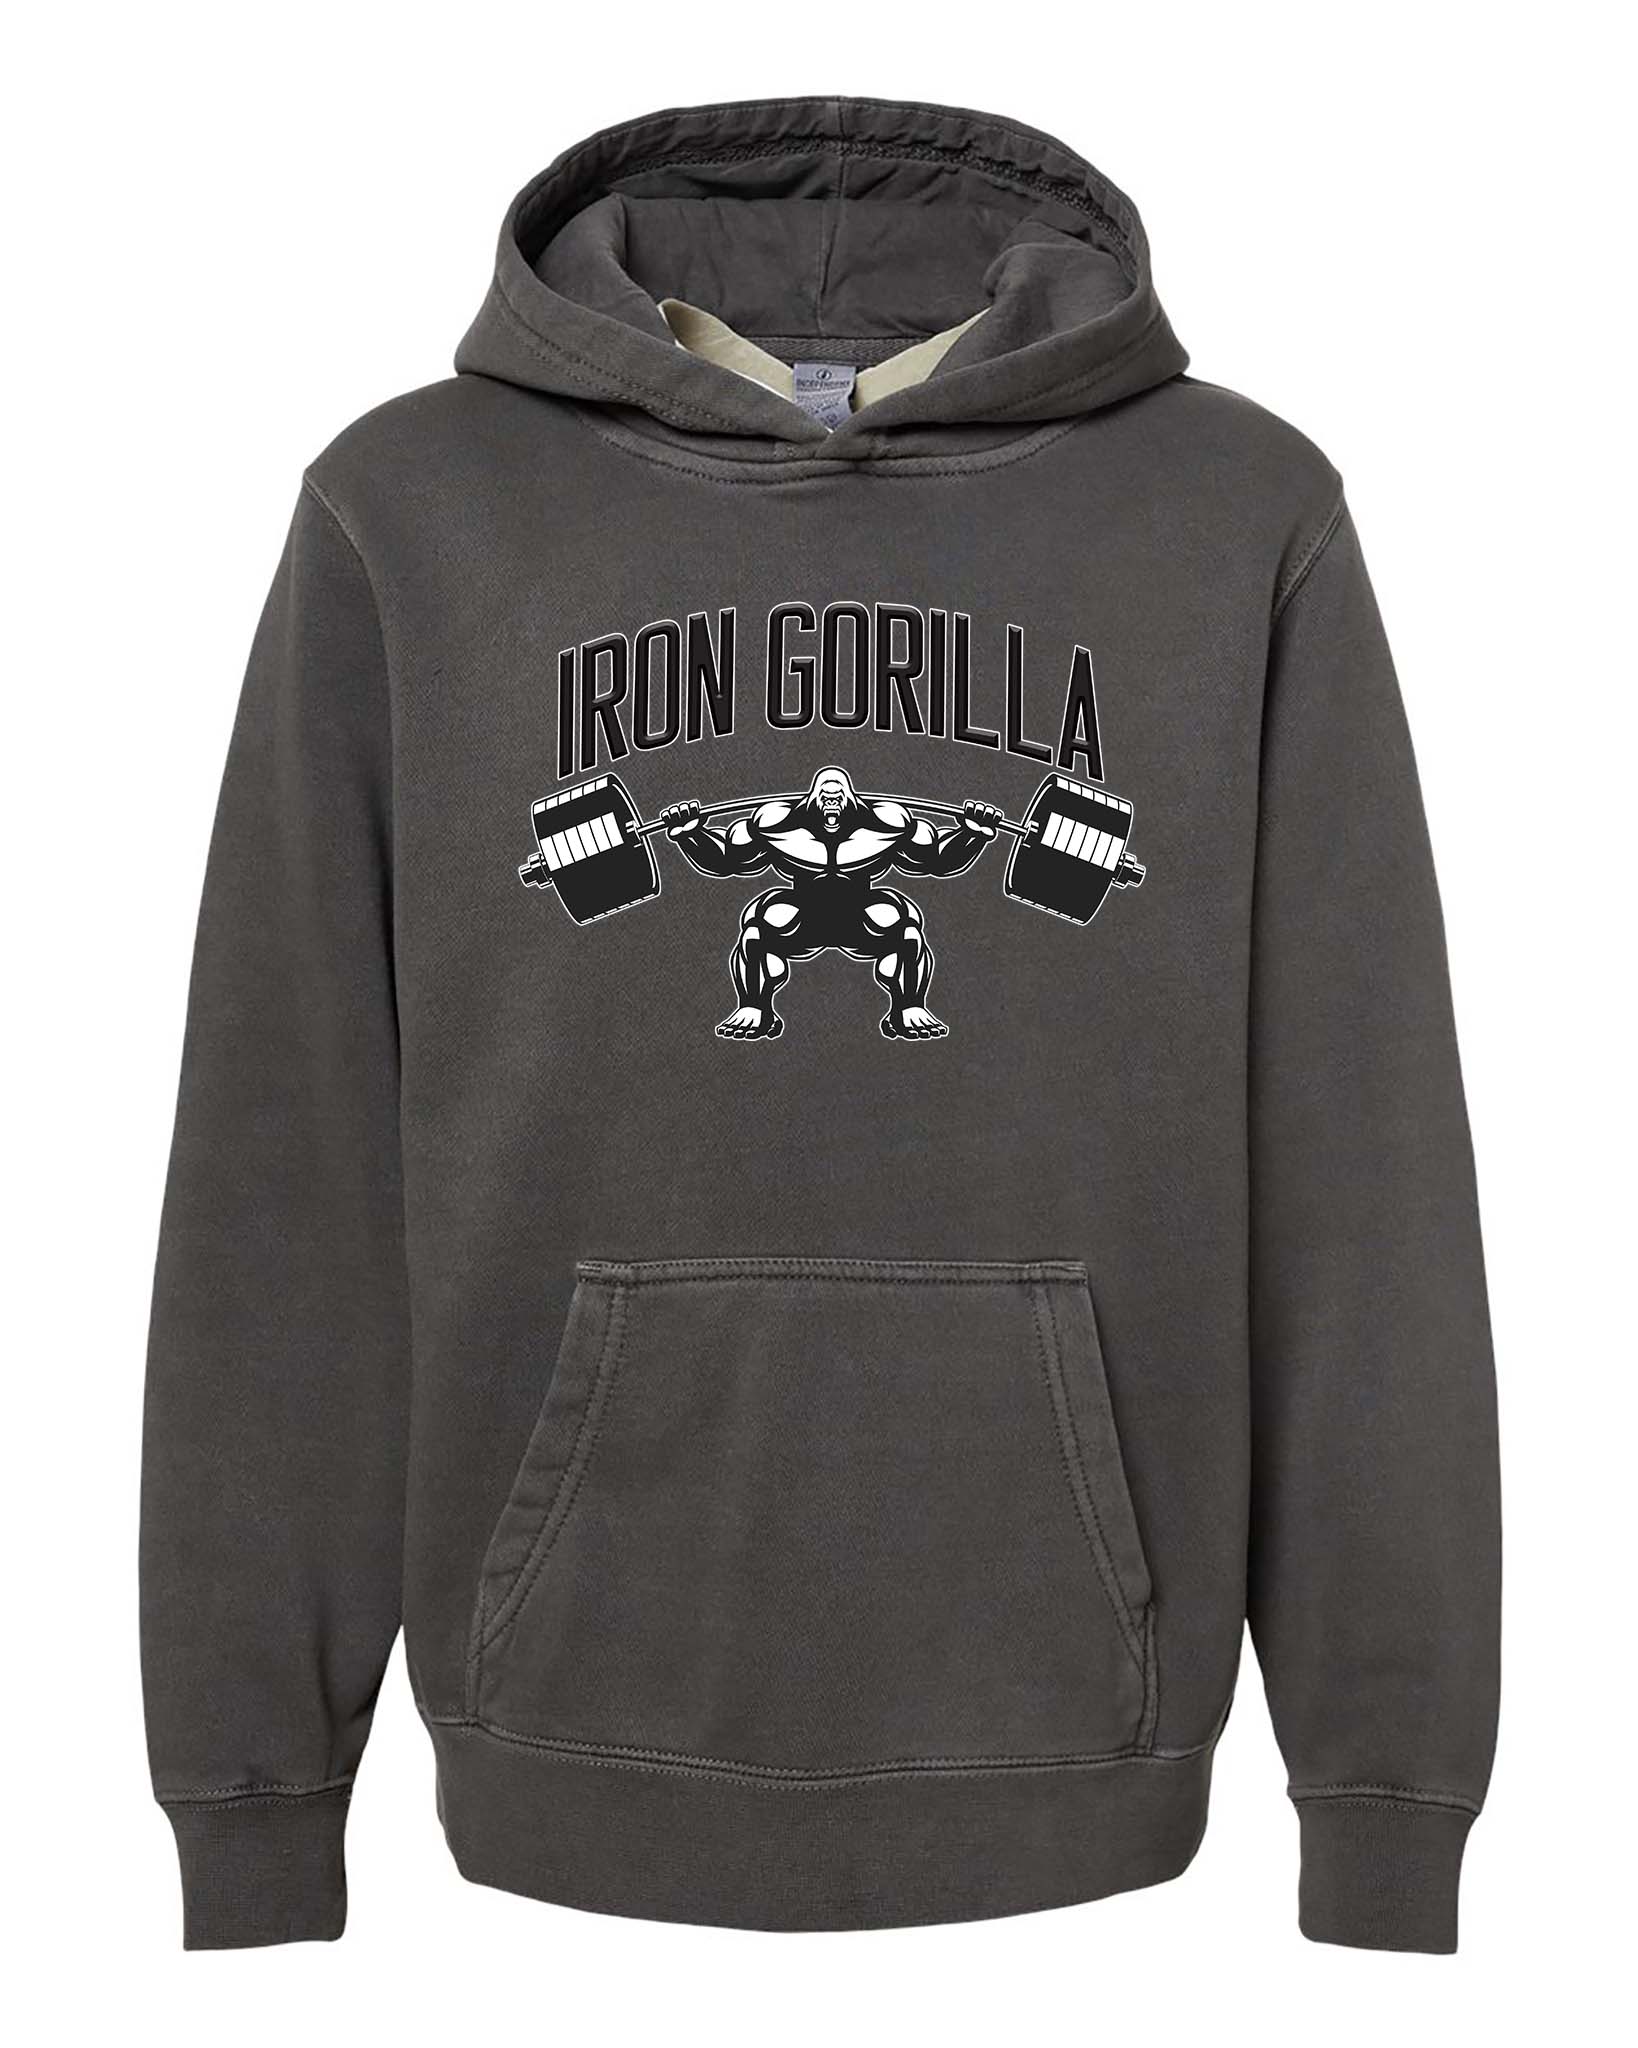 Youth "Iron Gorilla" Midweight Pigment-Dyed Pullover Hoodie